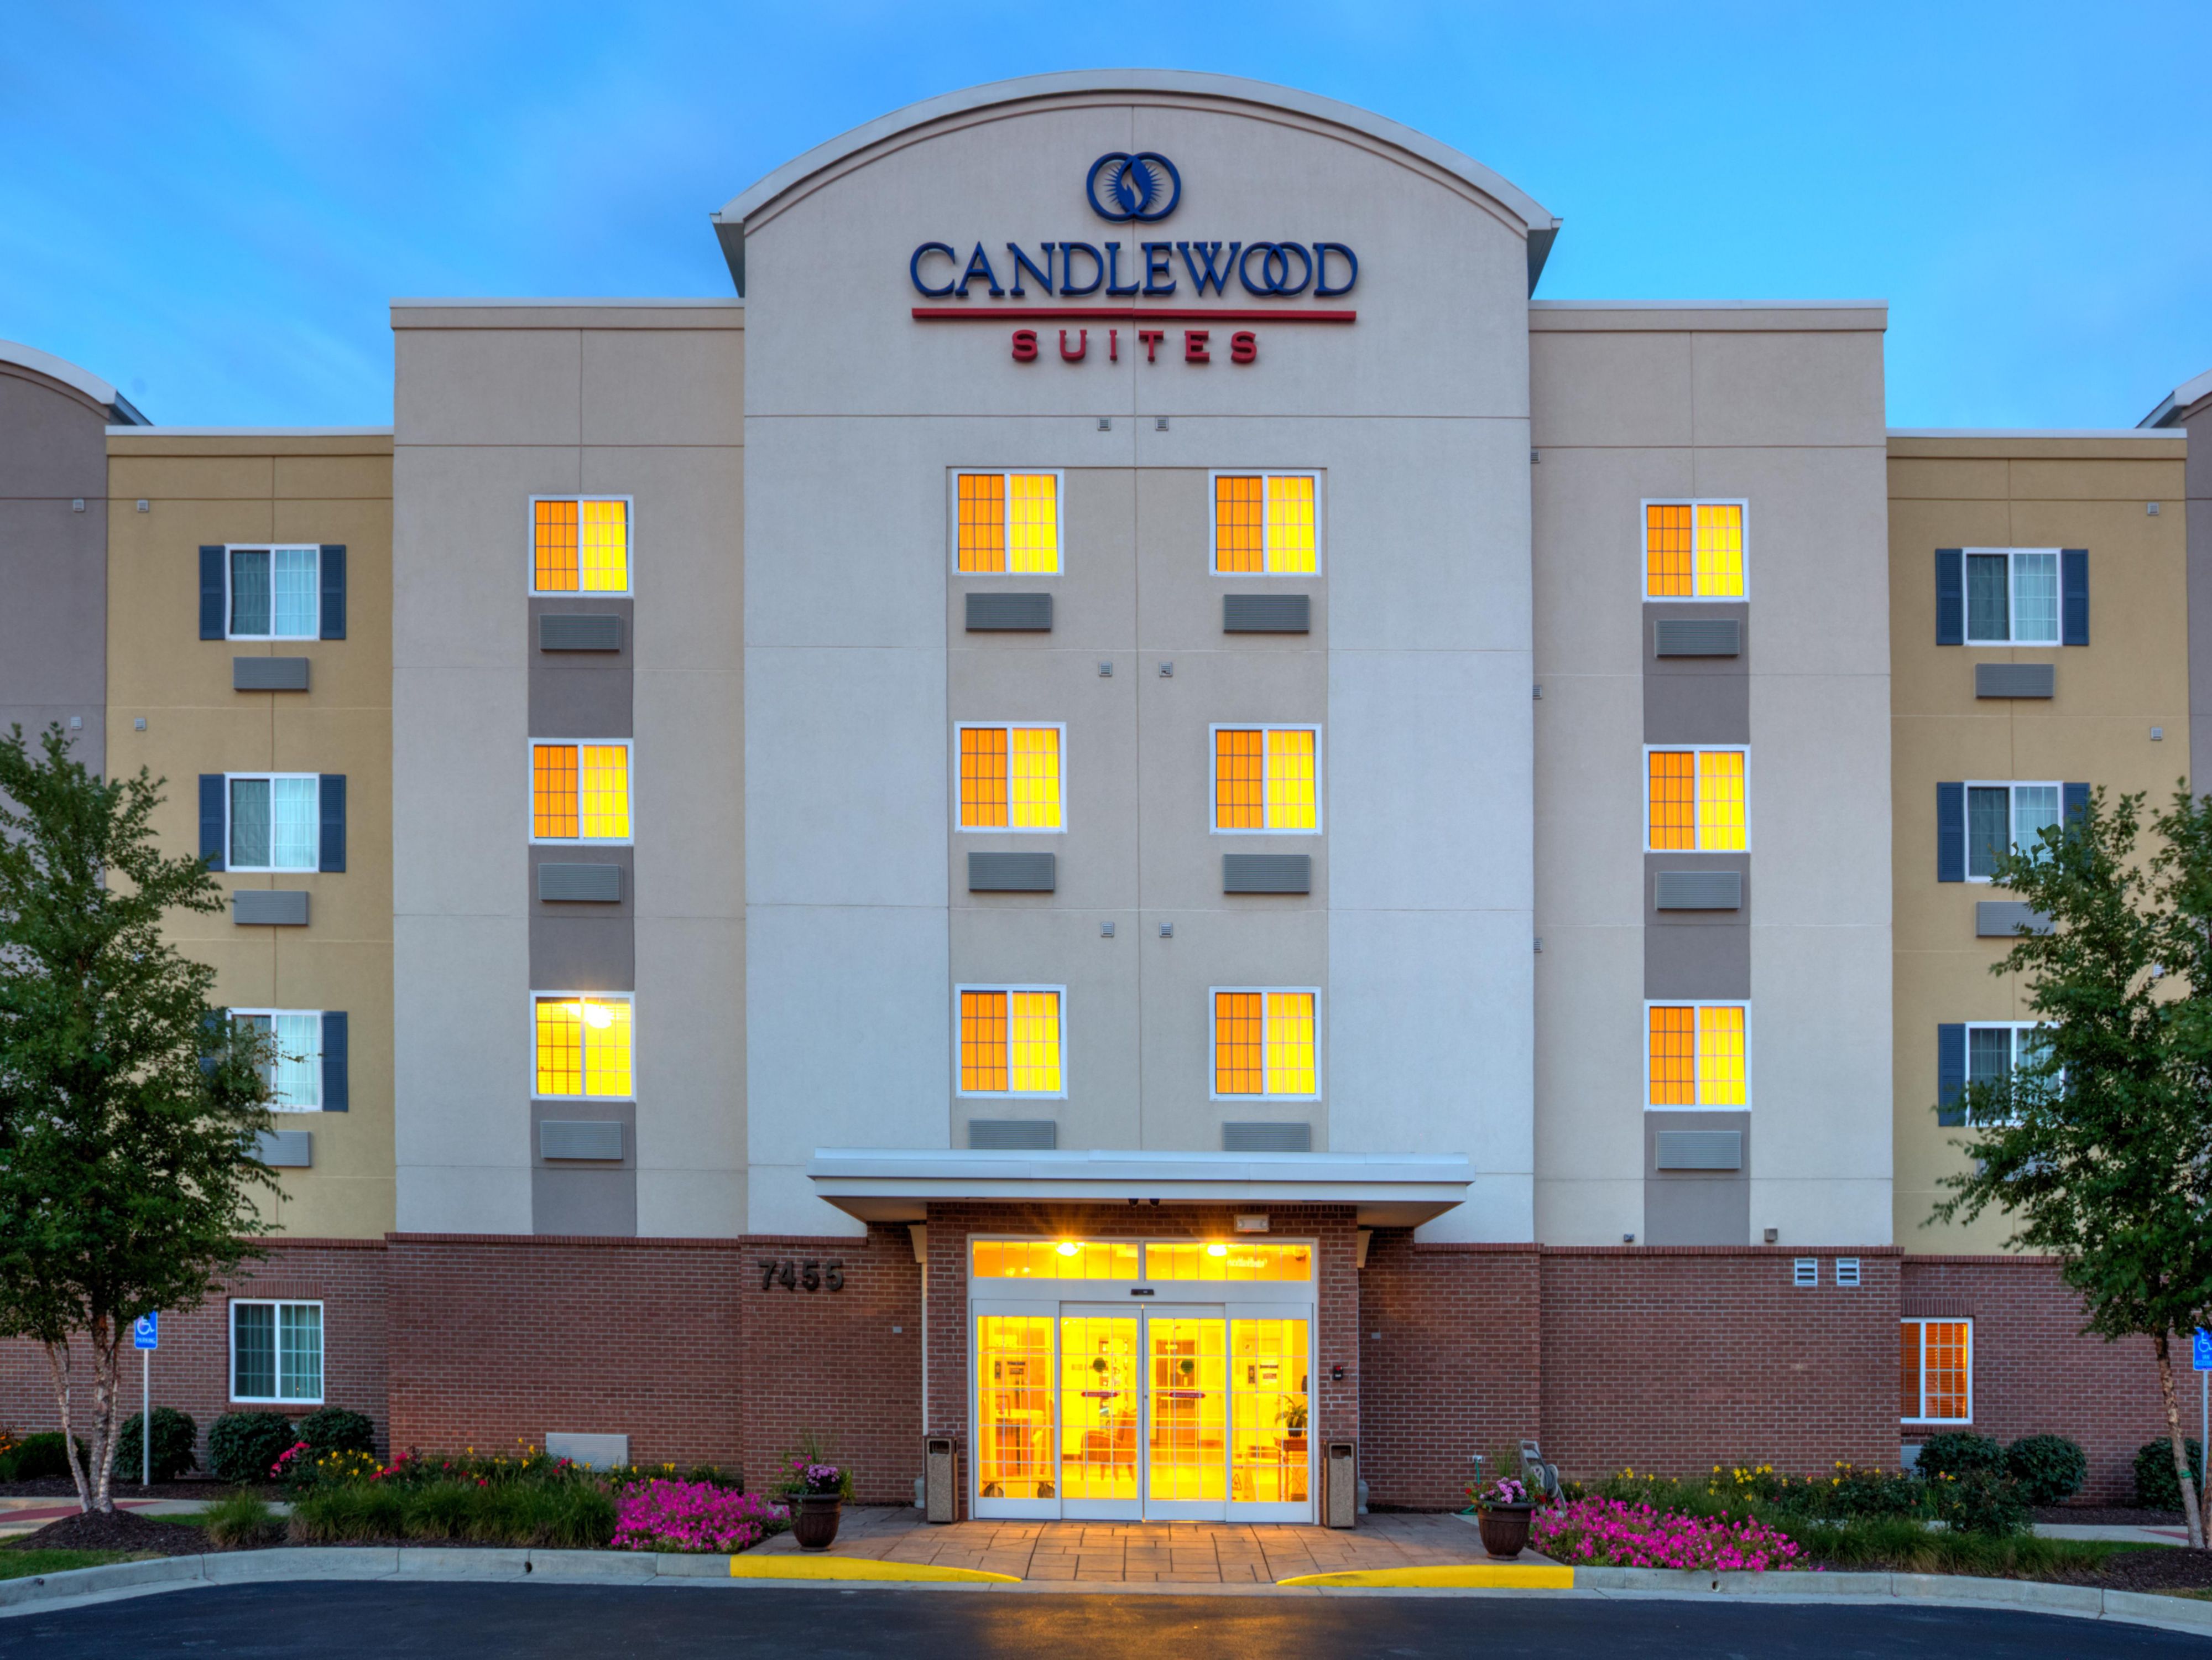 Candlewood Suites Indianapolis 4413320711 4x3